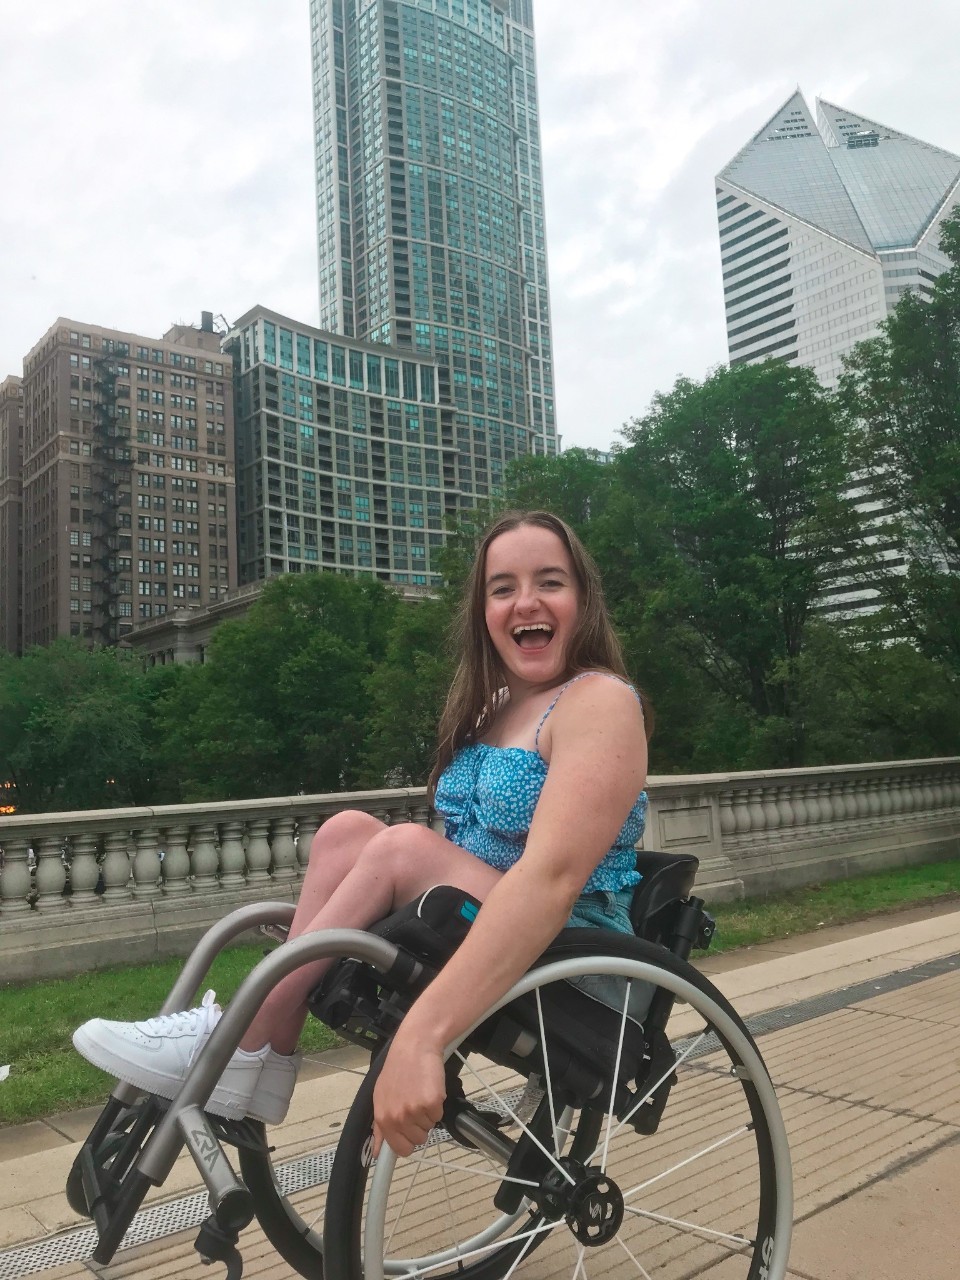 Rosie on a visit to Chicago, Illinois. She is smiling really big and tilting back in her wheelchair a bit. There are big buildings behind her. She is in a bright blue patterned tank top and shorts.